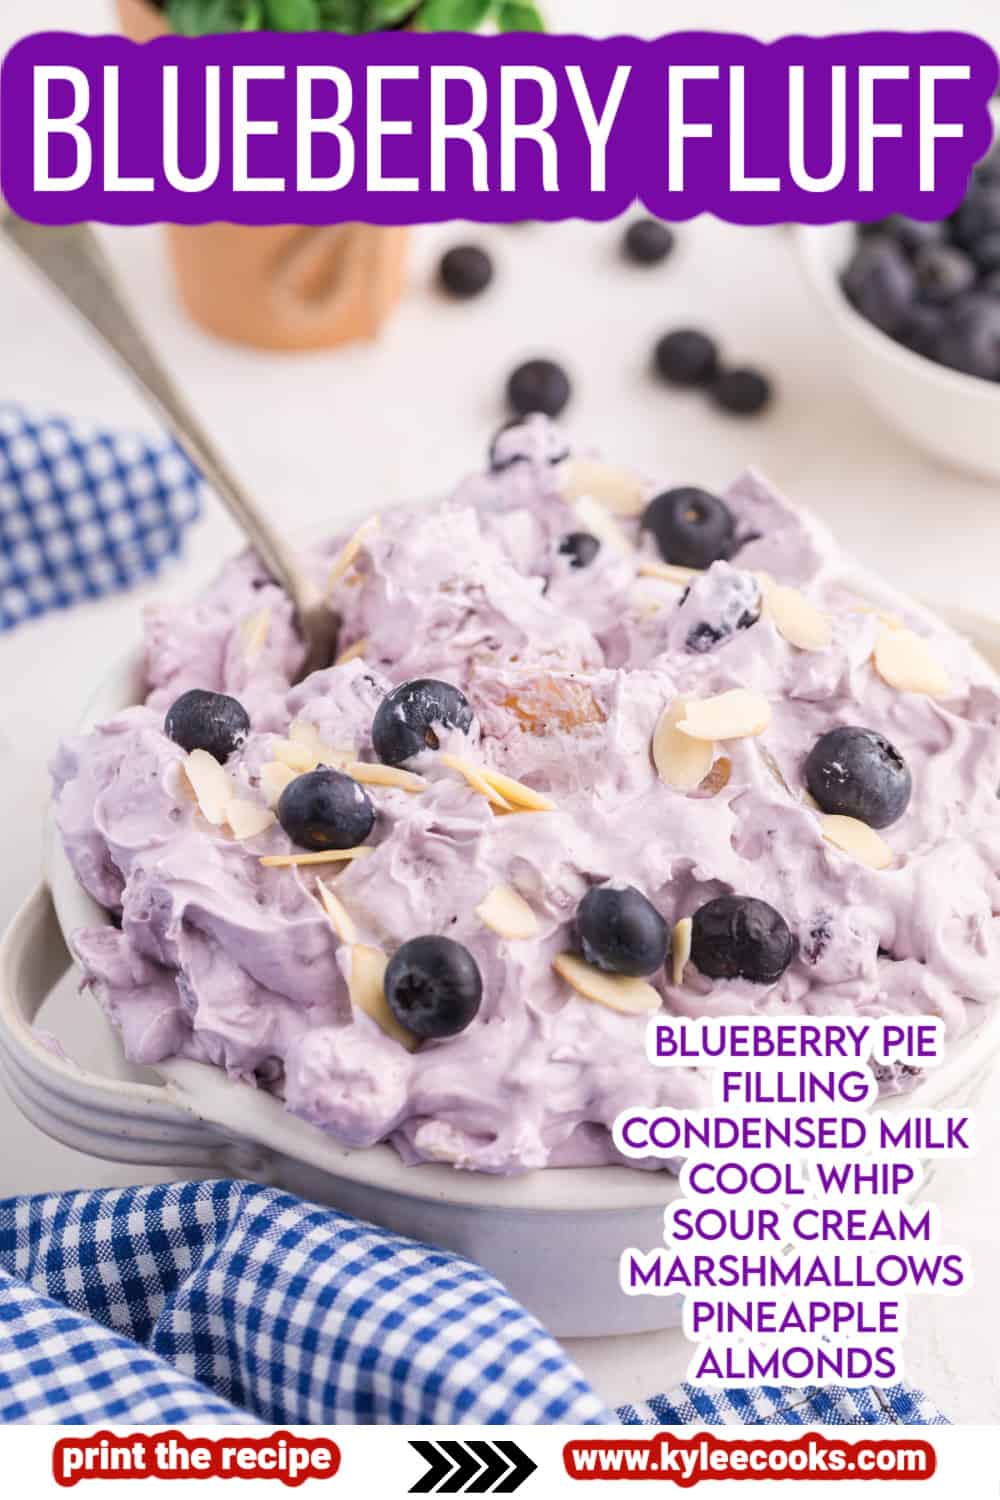 blueberry fluff salad with text overlaid.